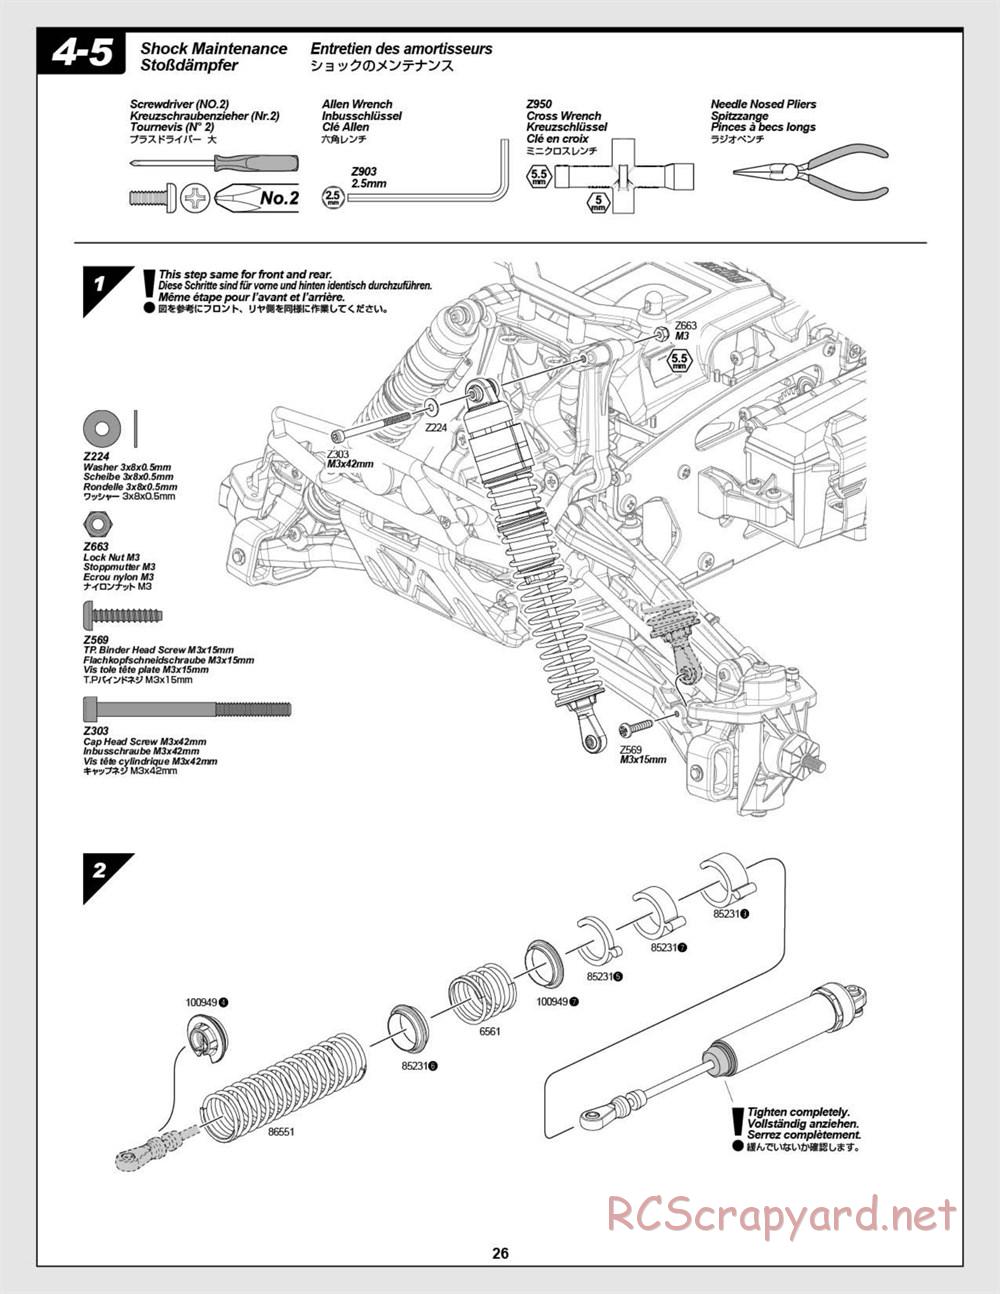 HPI - Savage Flux HP - Manual - Page 26